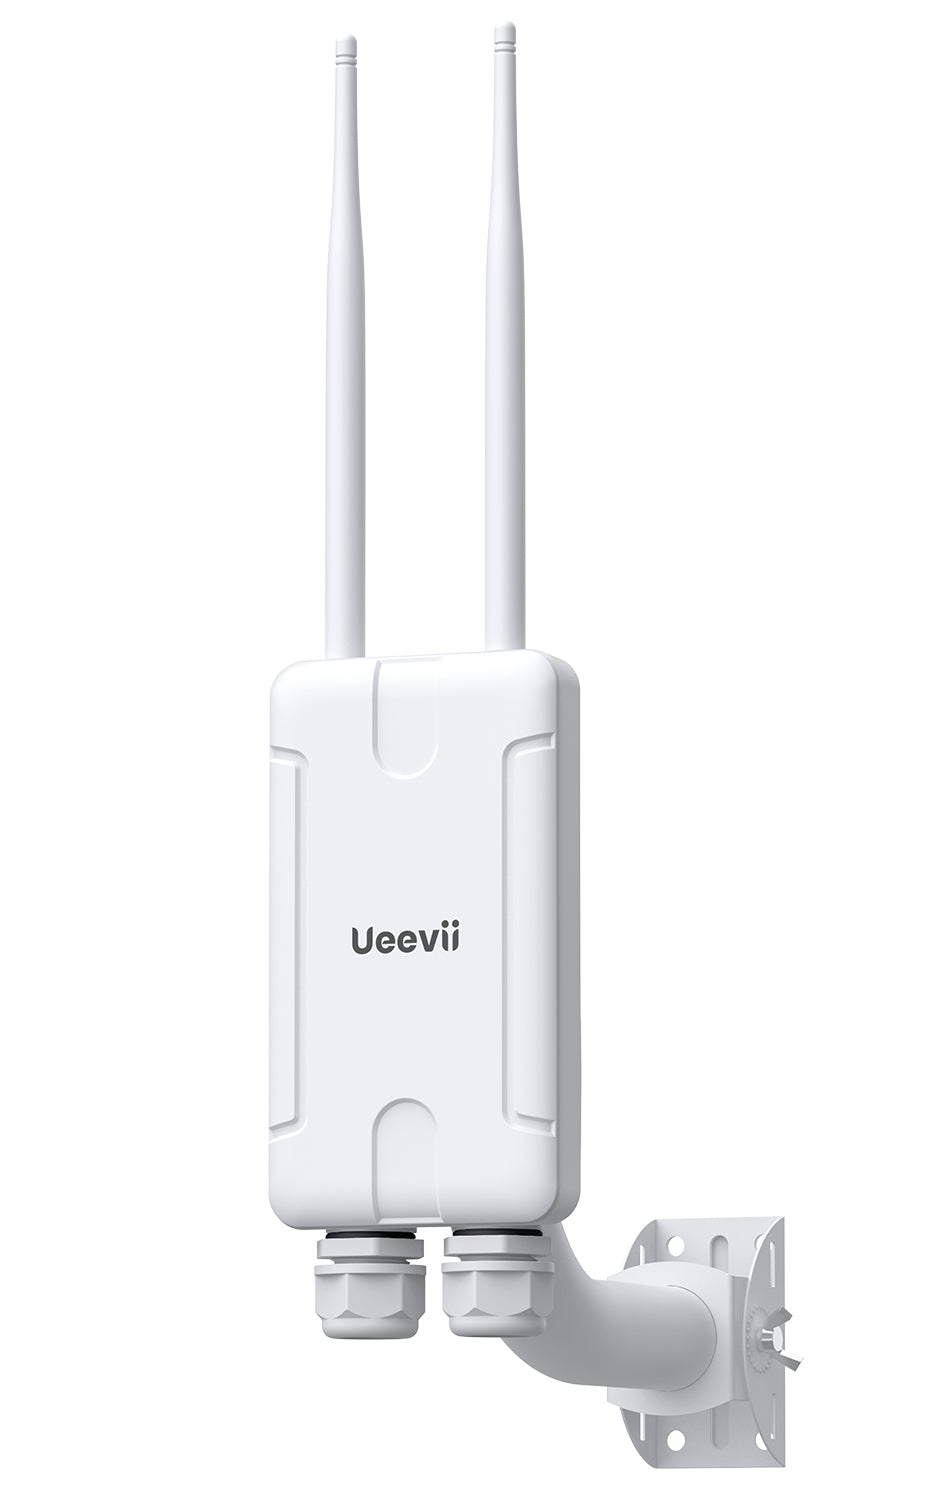 UeeVii WiFi 6 Outdoor WiFi Extender with Brackets & SFP Module,AX3000 2.4G 5.8G Wireless Access Point with RJ45 Gigabit Port & SFP Port 48V POE Powered, Router AP Mesh,WPA3,IP67 Waterproof